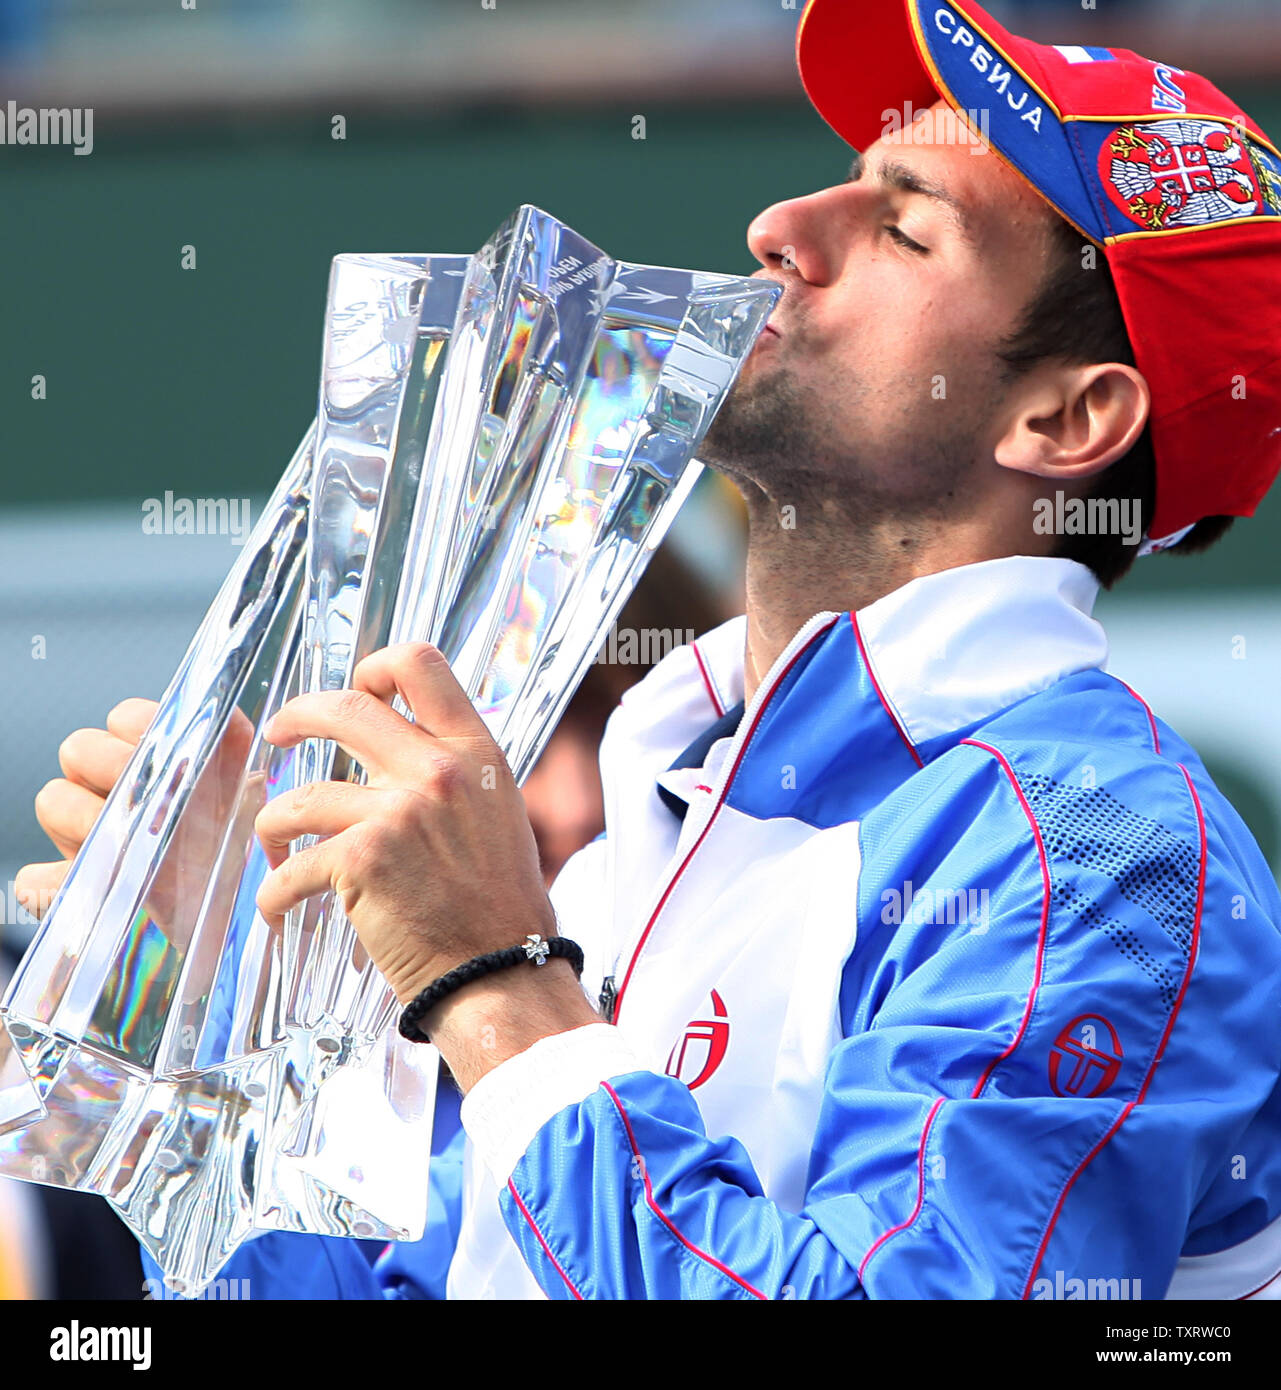 Serbian Novak Djokovic kisses the championship trophy after winning his mens final match against Spaniard Rafael Nadal at the BNP Paribas Open in Indian Wells, California on March 20, 2011.  Djokovic defeated Nadal 4-6, 6-3, 6-2 to win the tournament.   UPI/David Silpa Stock Photo